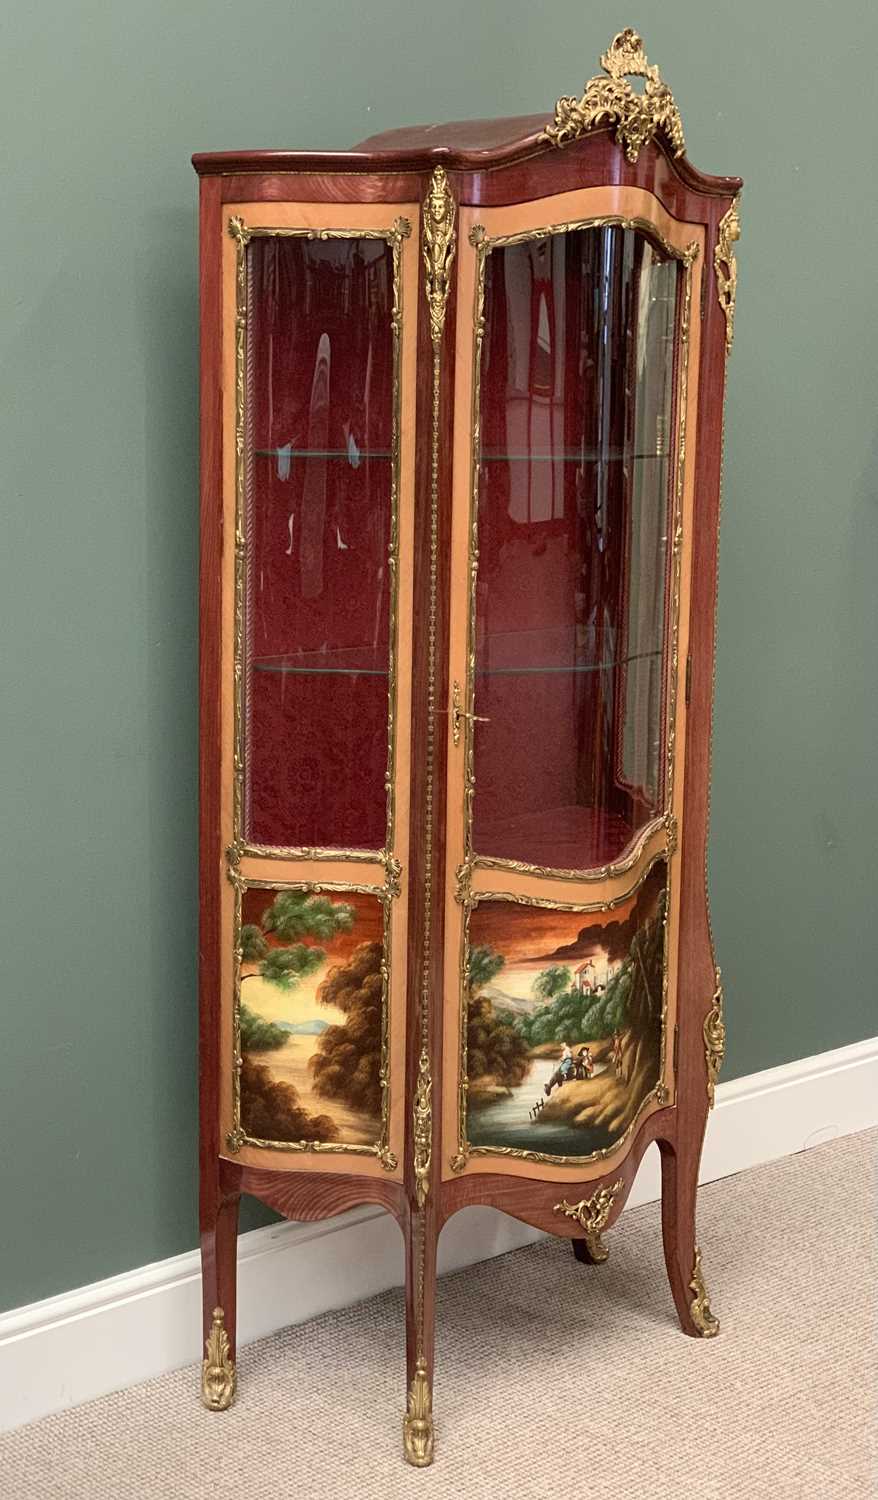 ANTIQUE FRENCH LOUIS XV STYLE VITRINE by H & L Epstein Ltd, London, having vernis martin type - Image 2 of 7